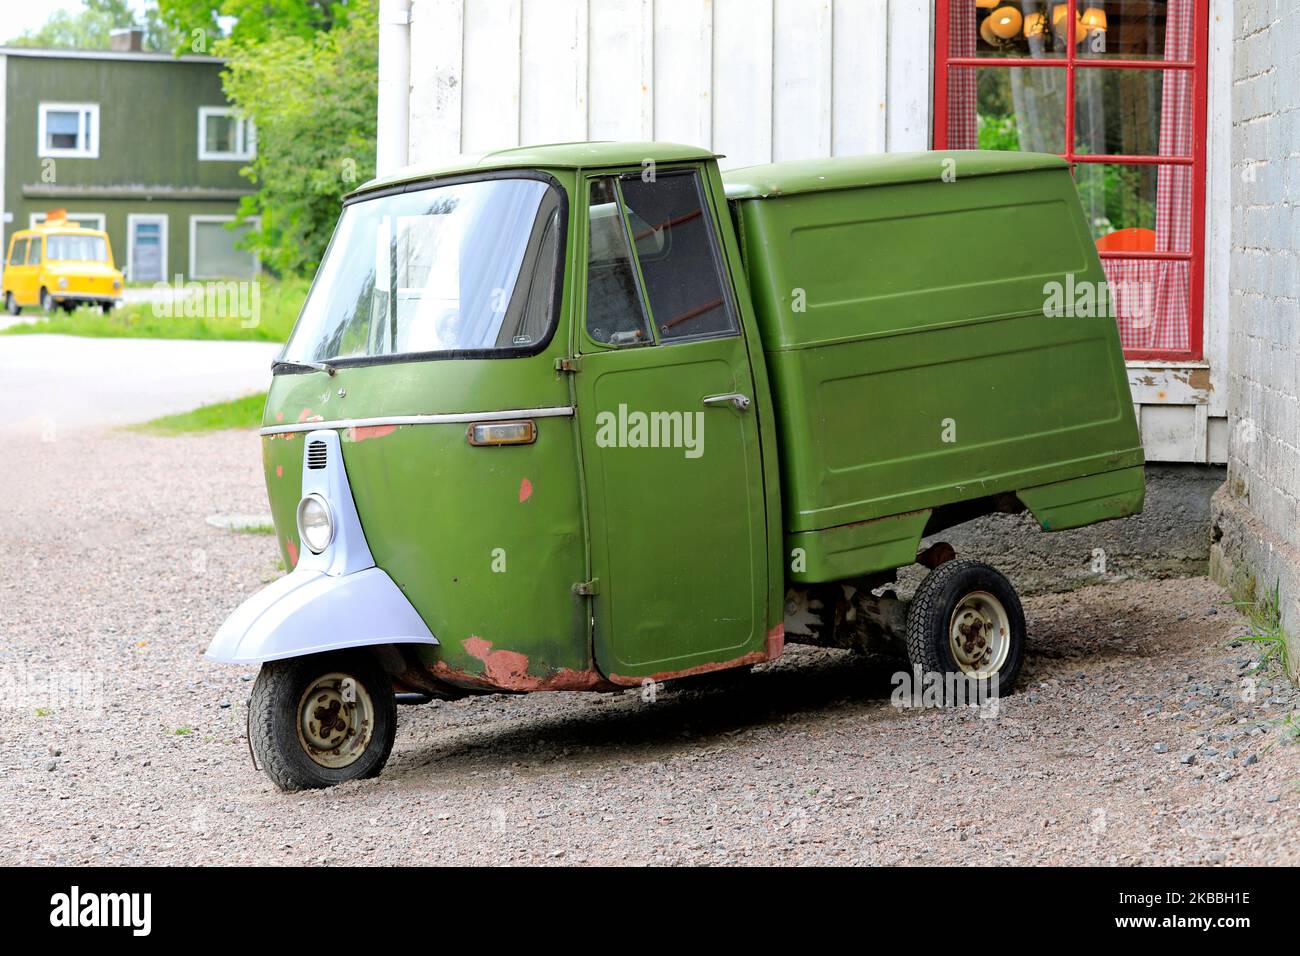 Green Piaggio Ape three-wheeled light commercial vehicle, marketed as an adaption of Vespa scooter by Piaggio. Riihikoski, Finland. June 11, 2022. Stock Photo